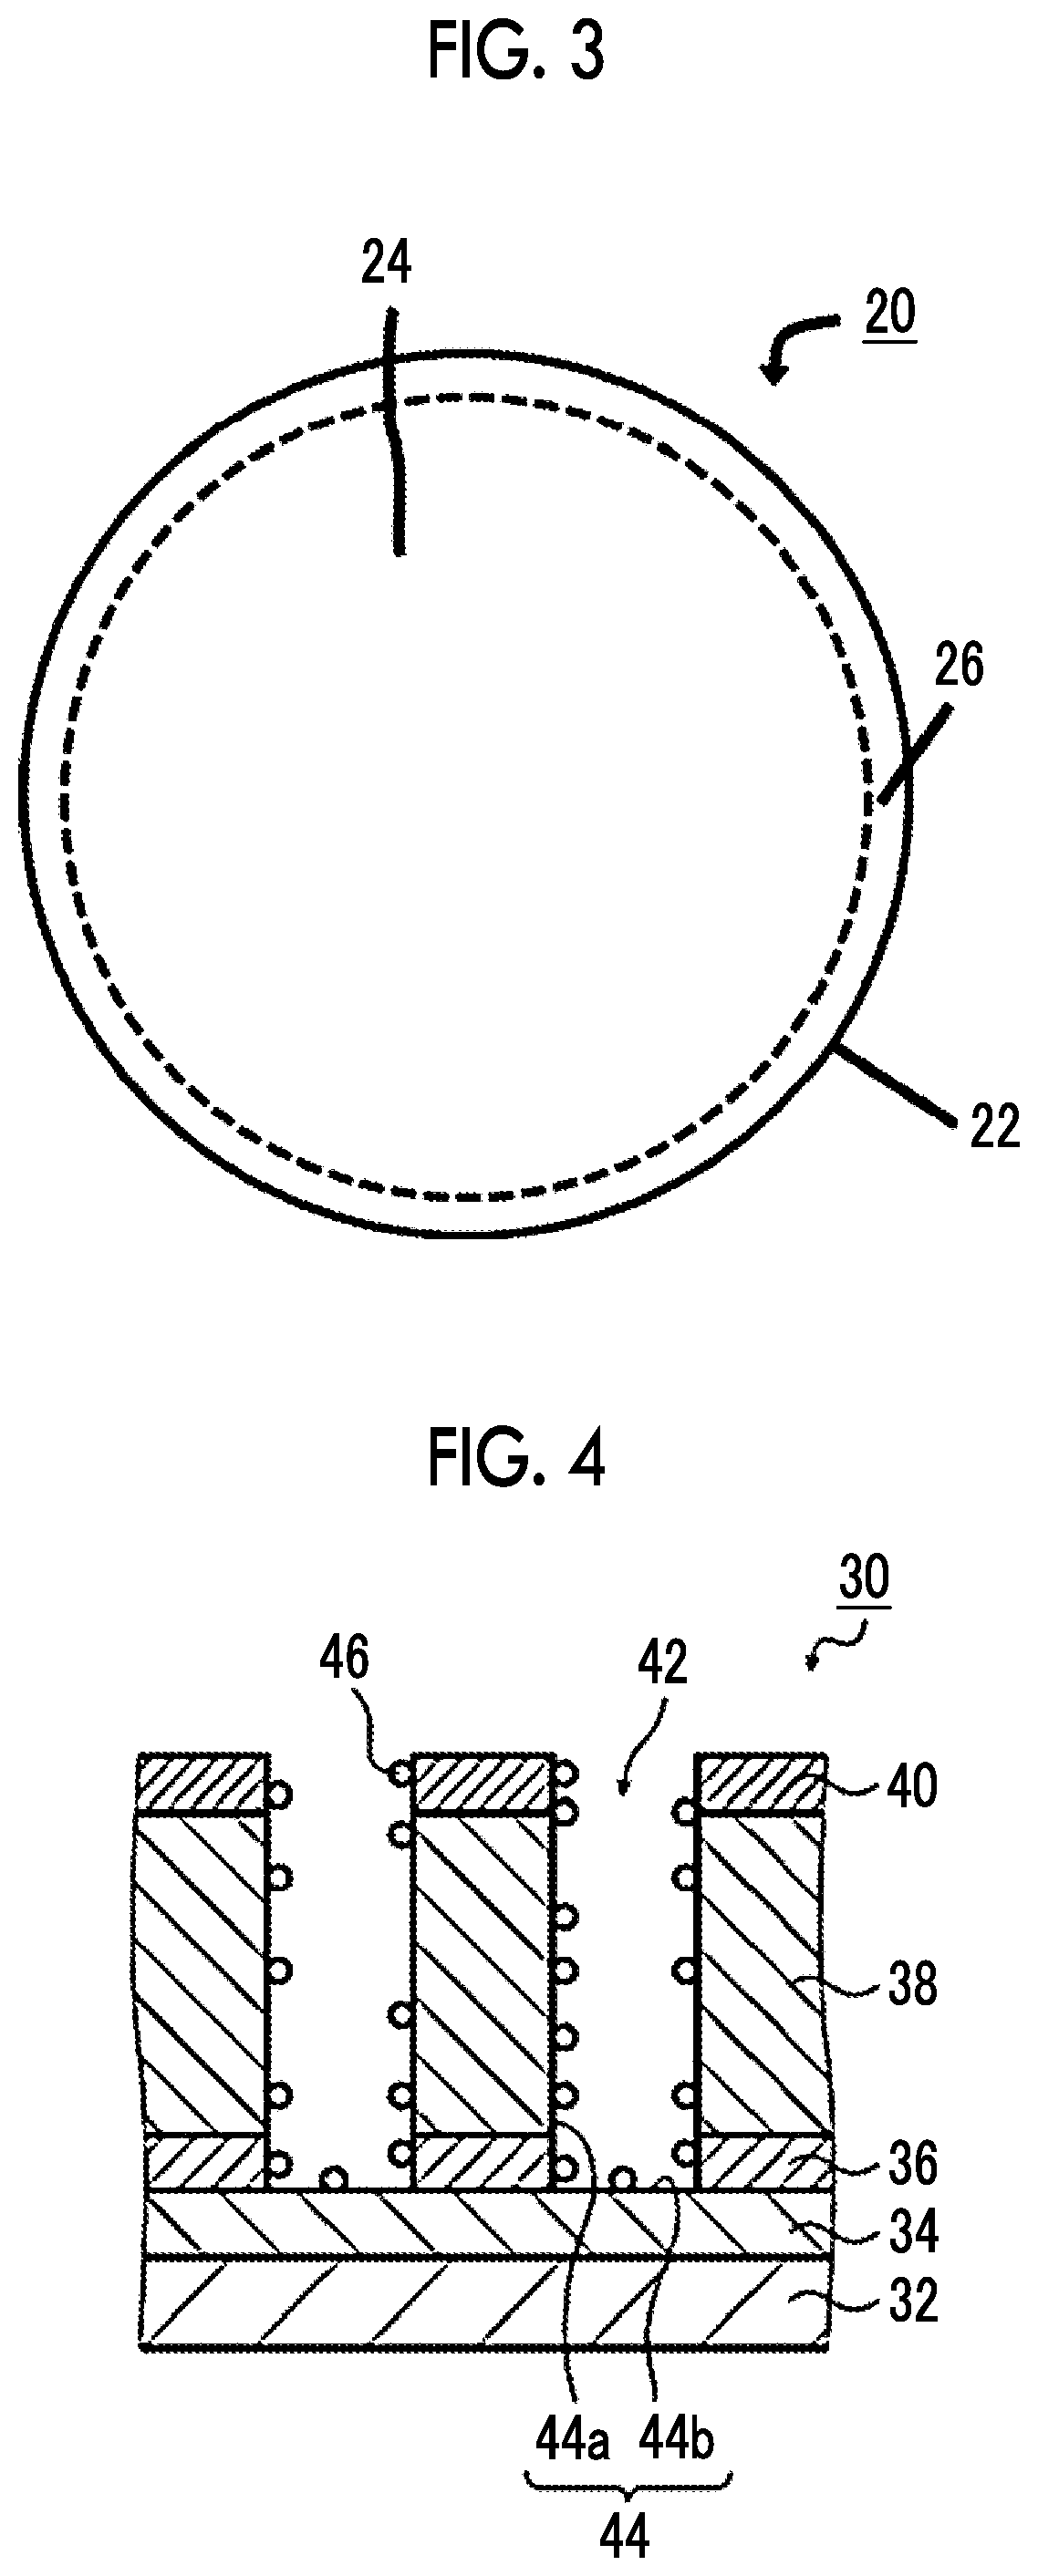 Chemical solution and method for treating substrate